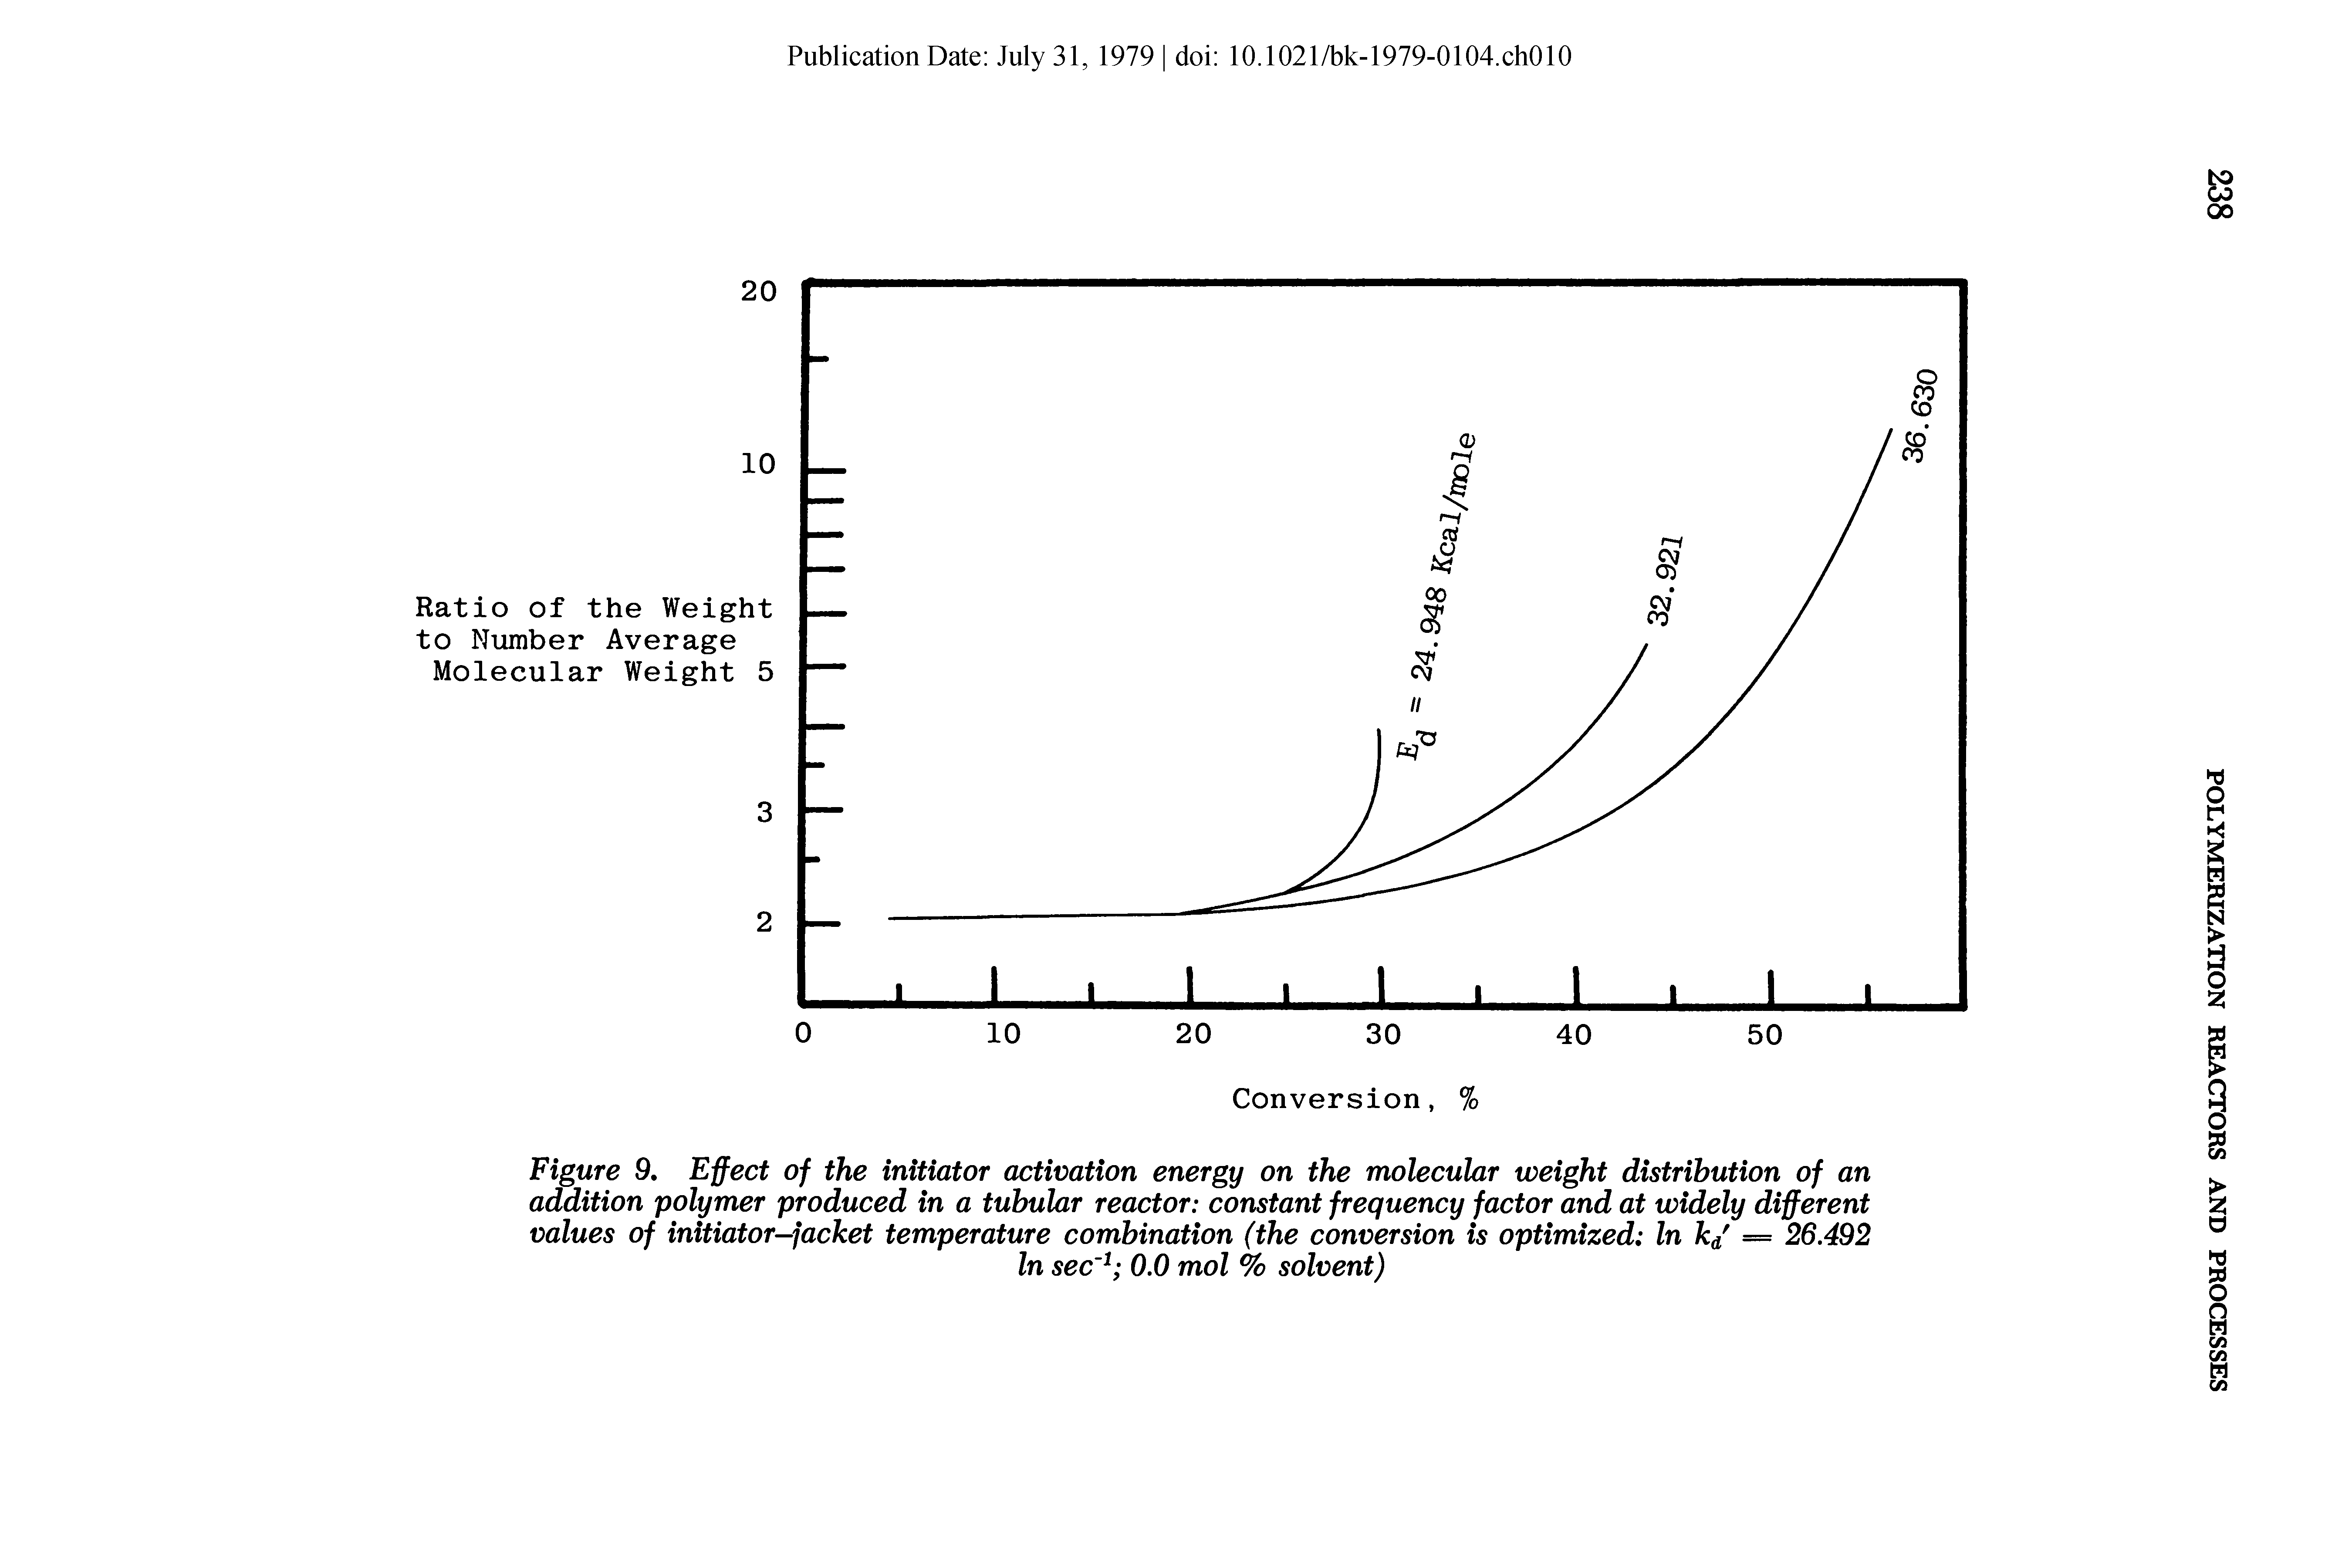 Figure 9, Effect of the initiator activation energy on the molecular weight distribution of an addition polymer produced in a tubular reactor constant frequency factor and at widely different values of initiator—jacket temperature combination (the conversion is optimized In k/ = 26.492...